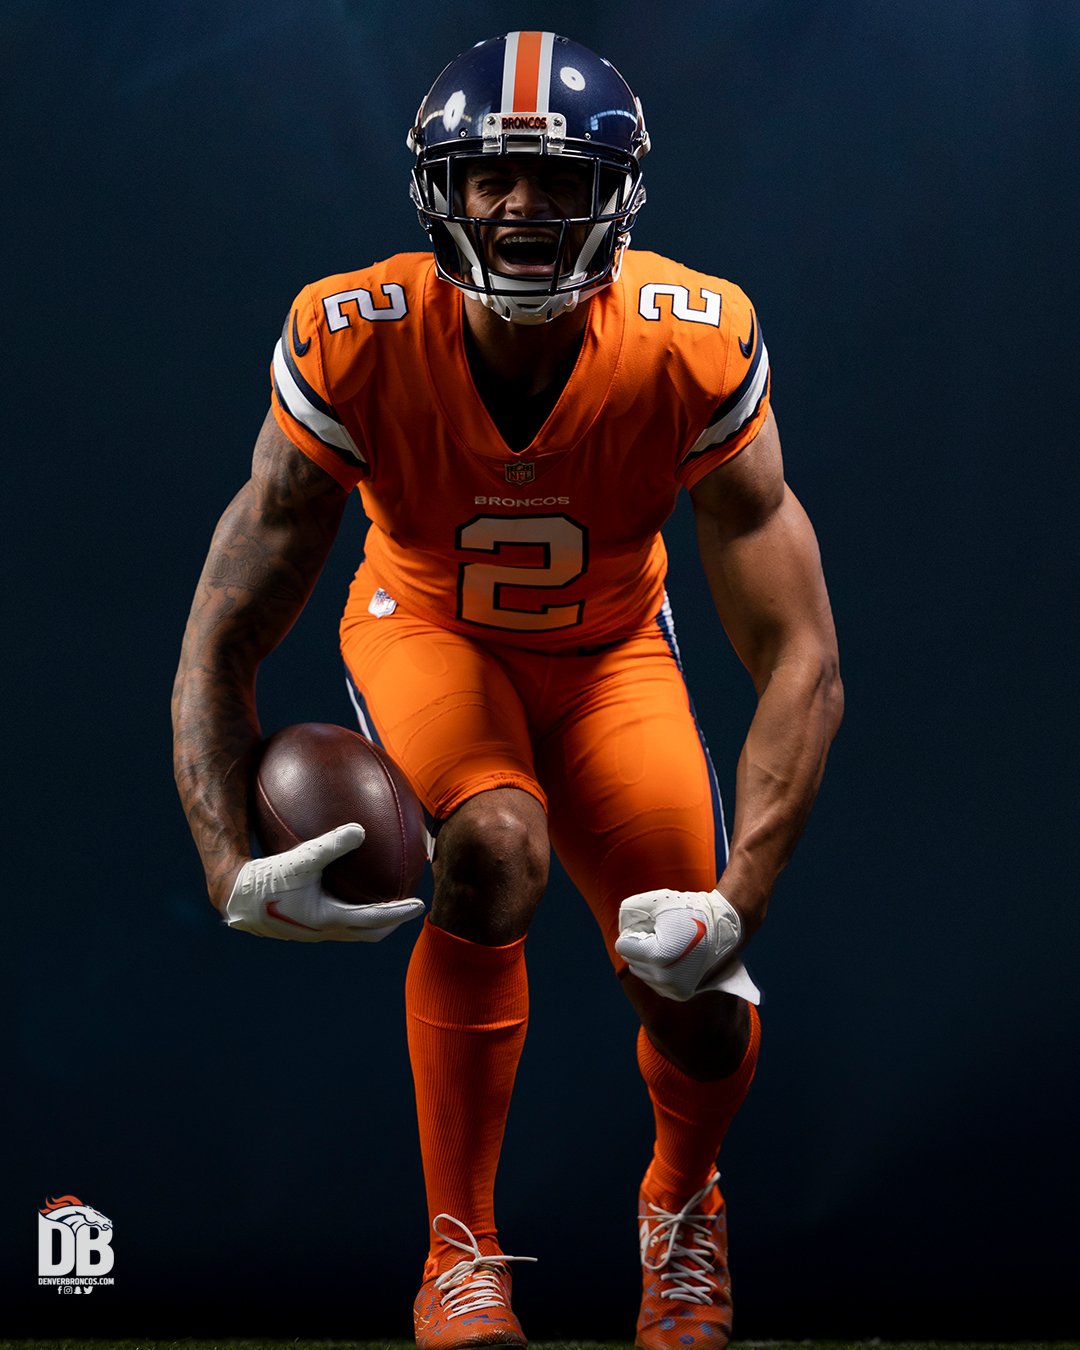 NFL on FOX - Thoughts on the Denver orange color rush jerseys today? 